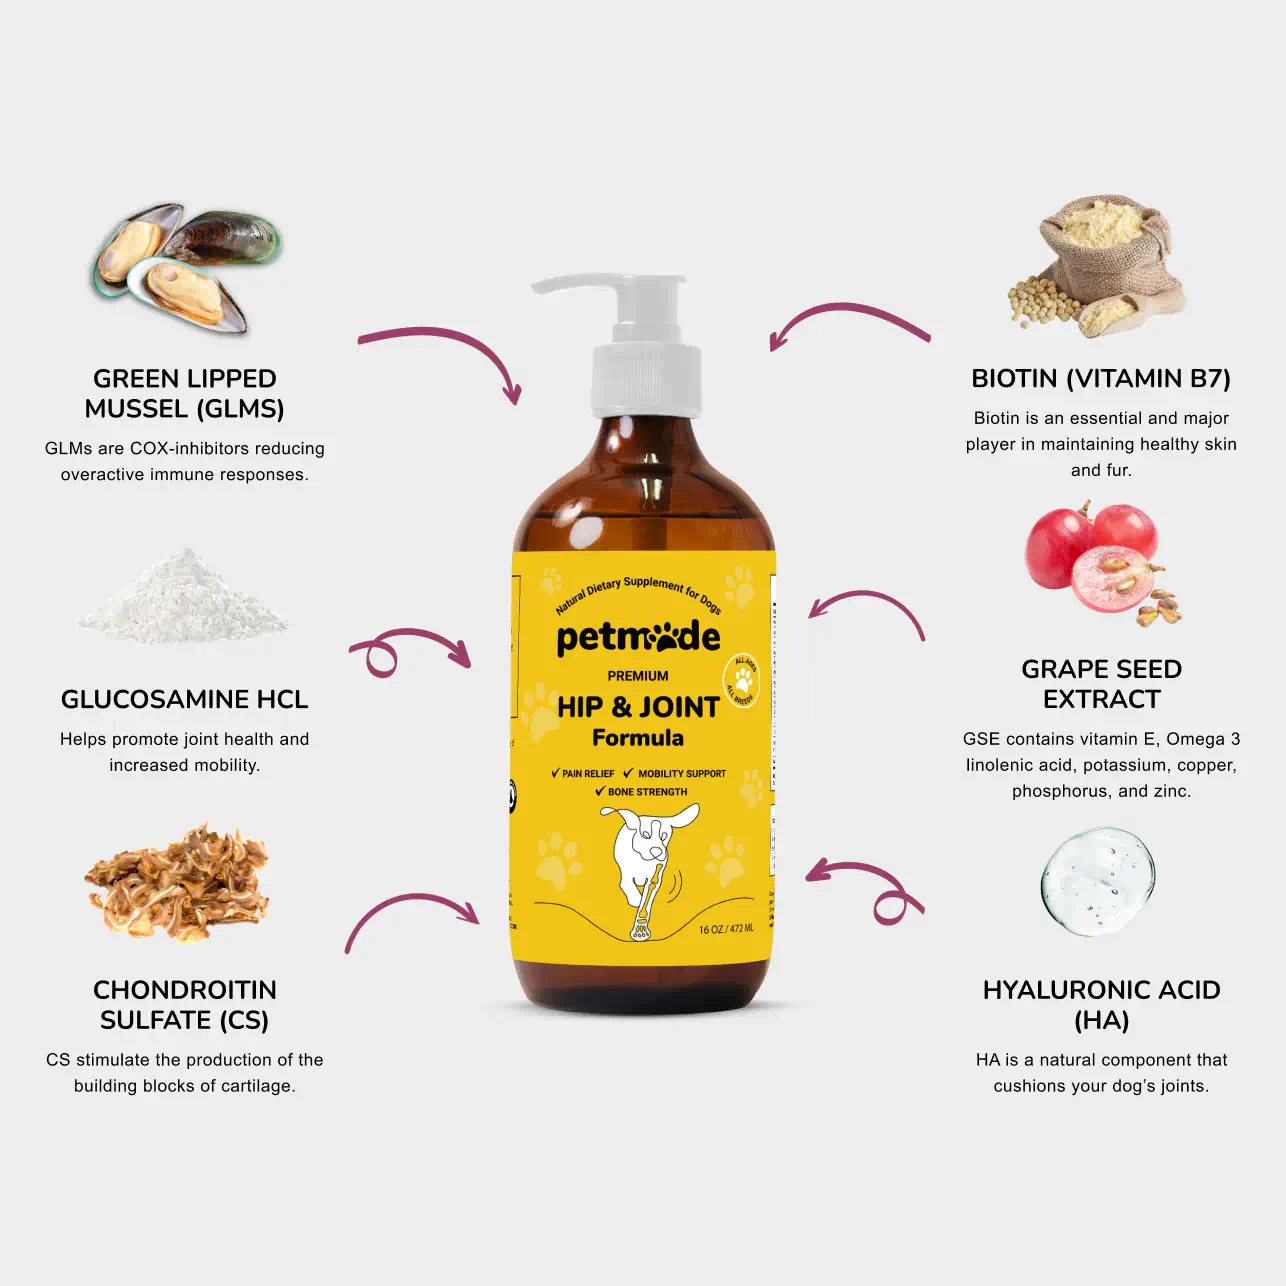 Infographic of ingredients used in the product